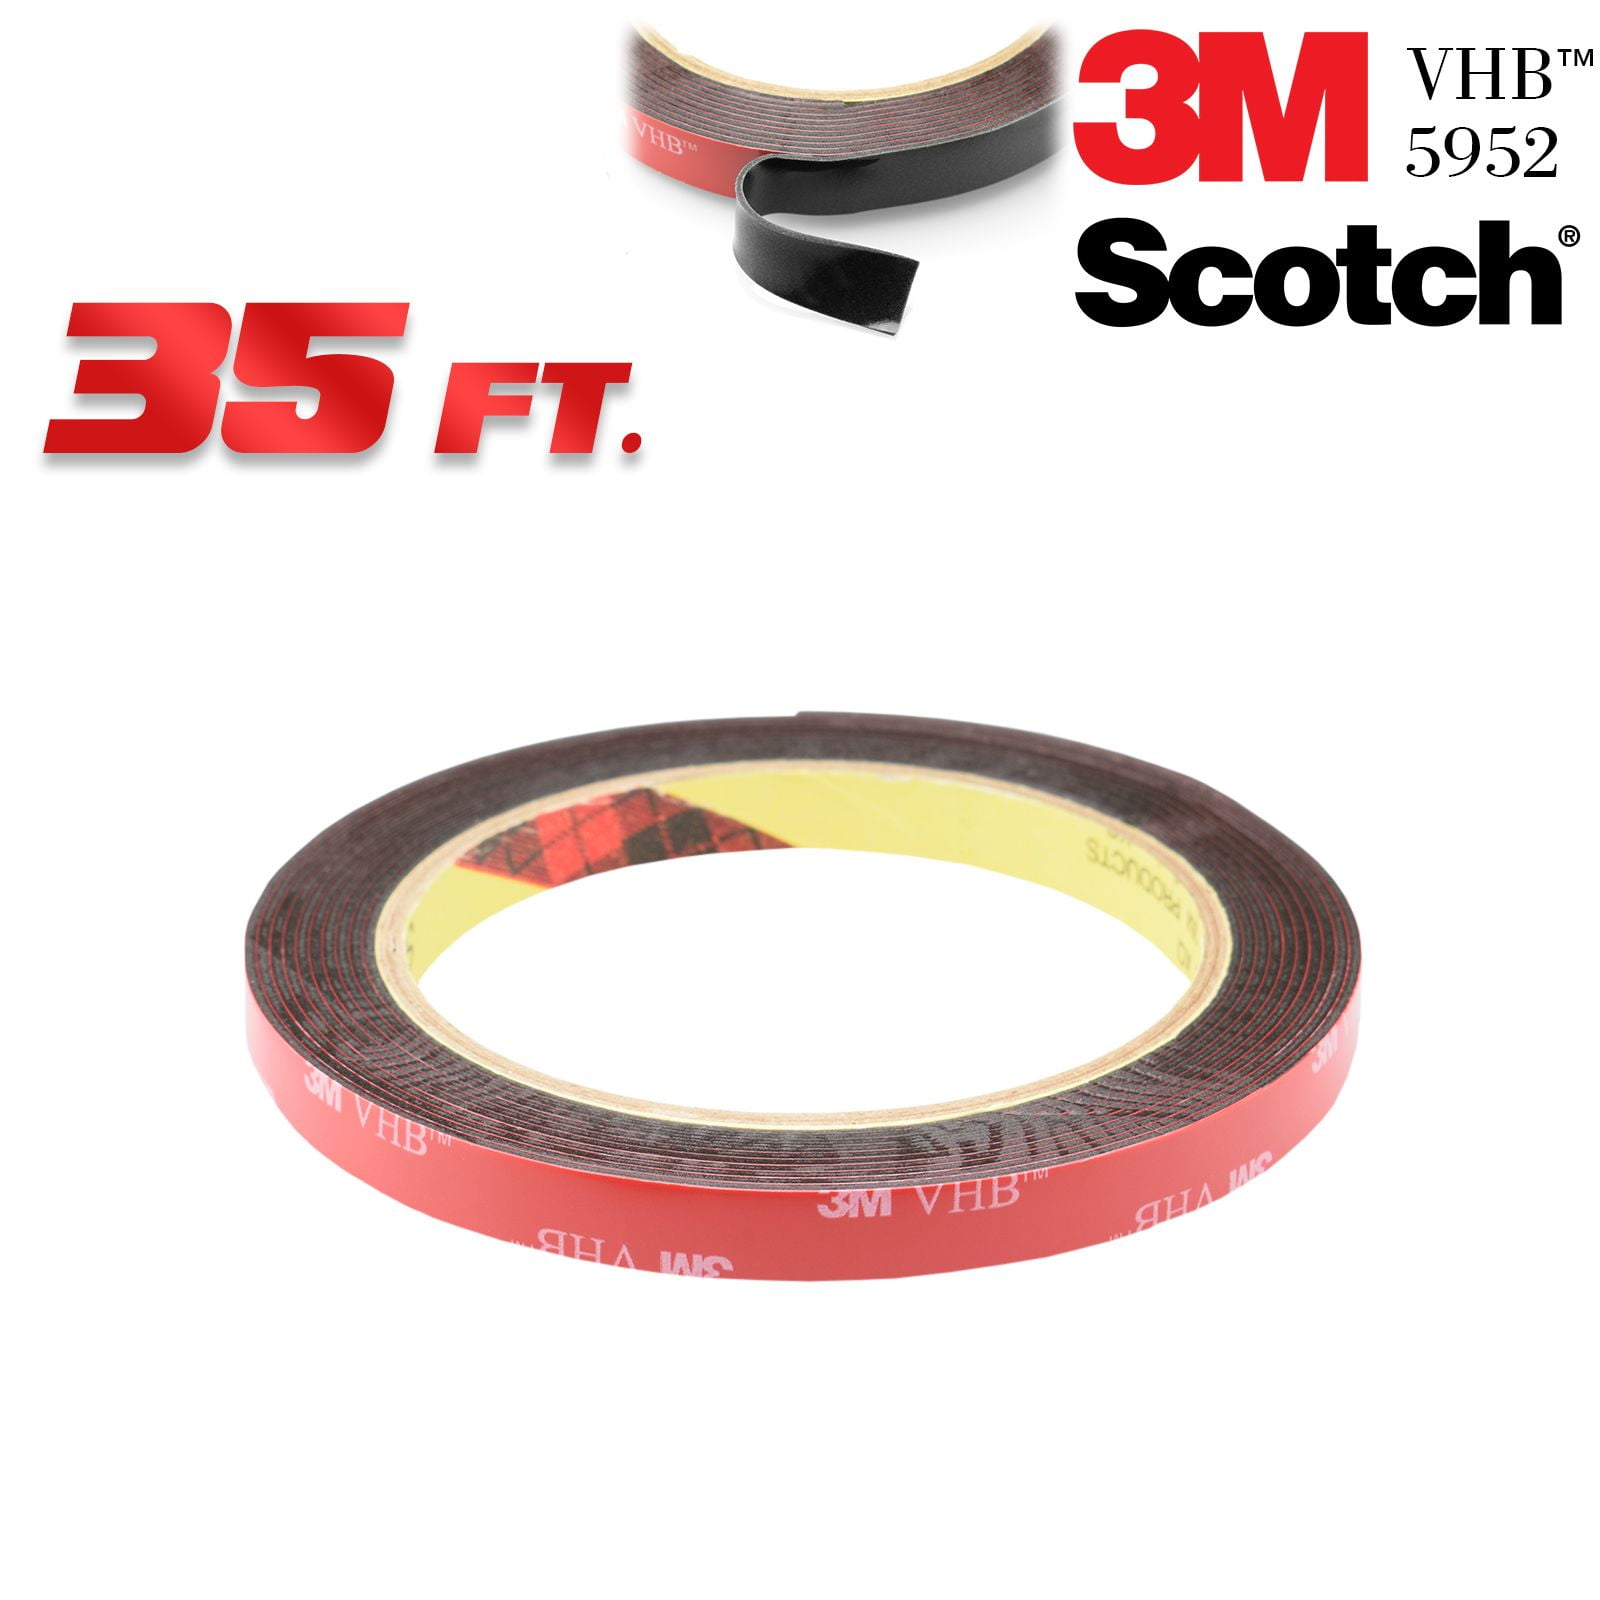 Genuine 8MM 3M VHB #5952 Double-Sided Mounting Tape 10.5M